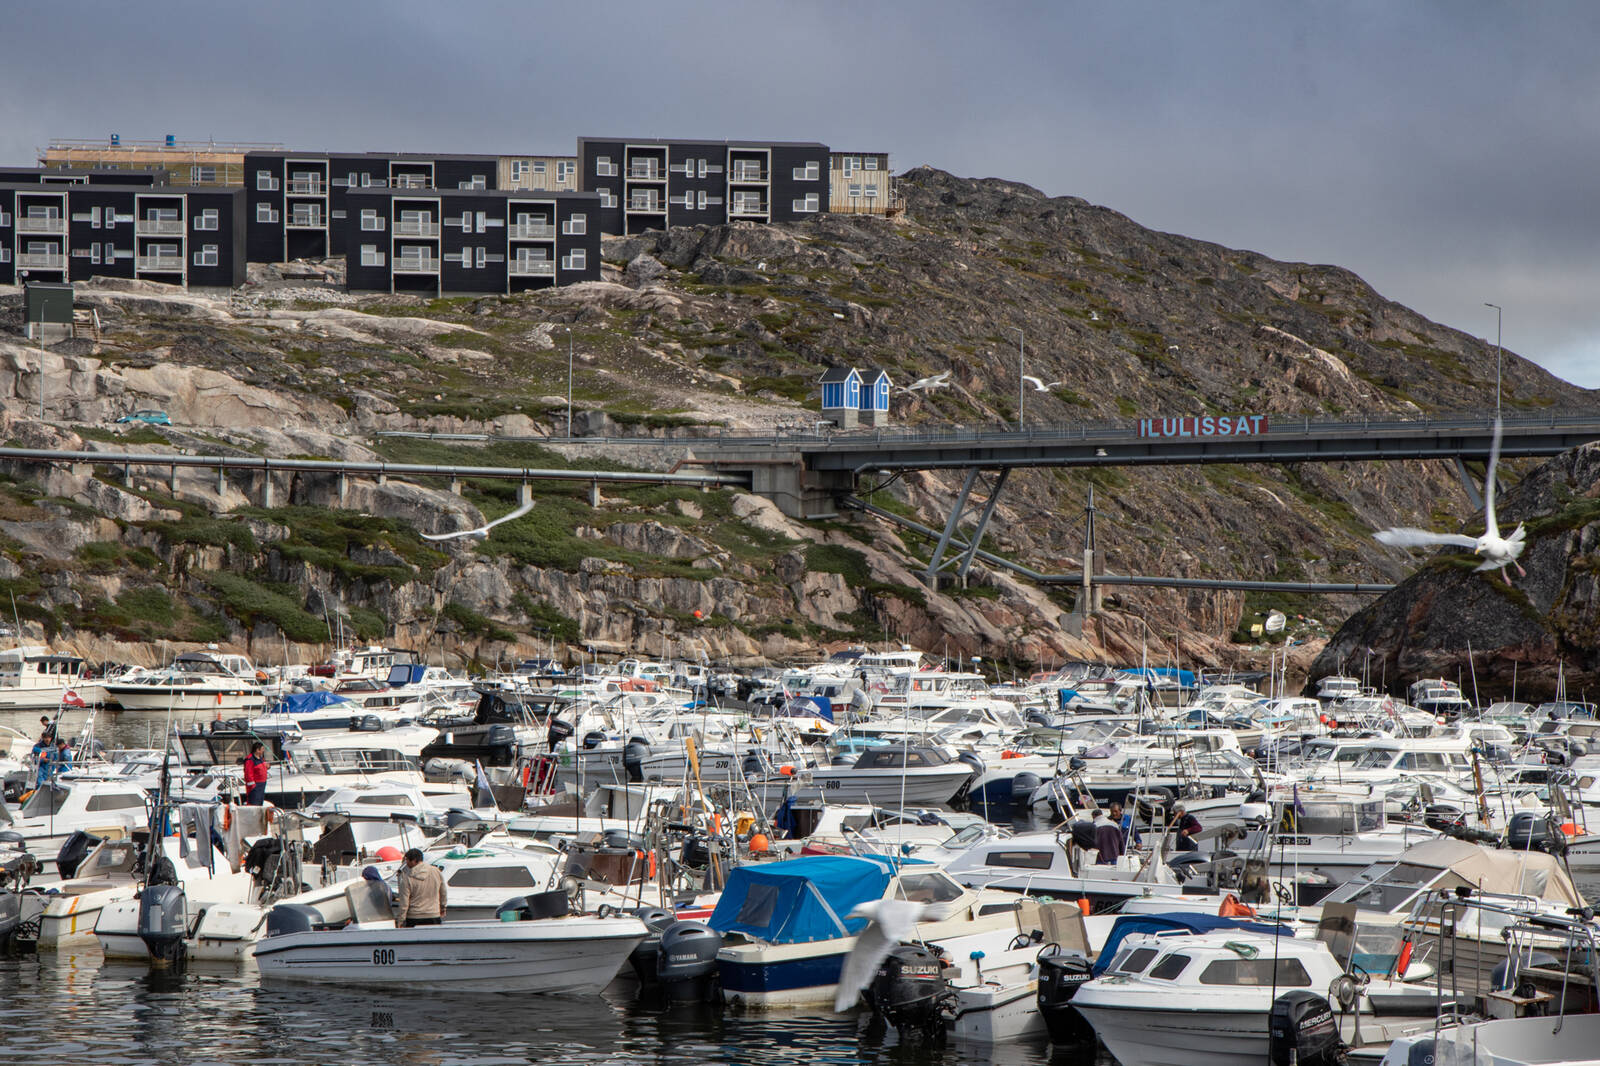 Image of Ilulissat Harbour by Janina Wilde